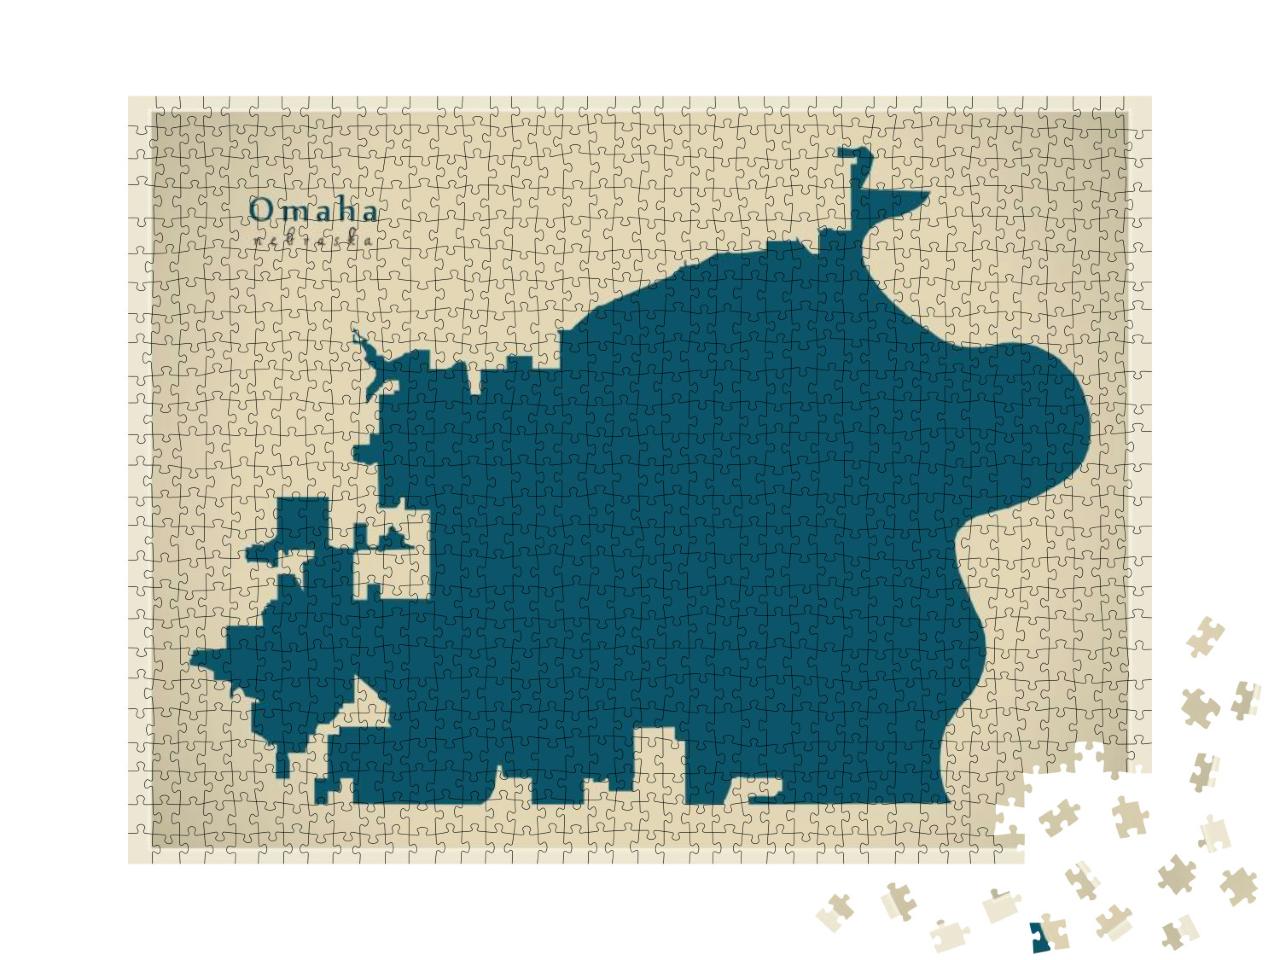 Modern Map - Omaha Nebraska City of the Usa... Jigsaw Puzzle with 1000 pieces